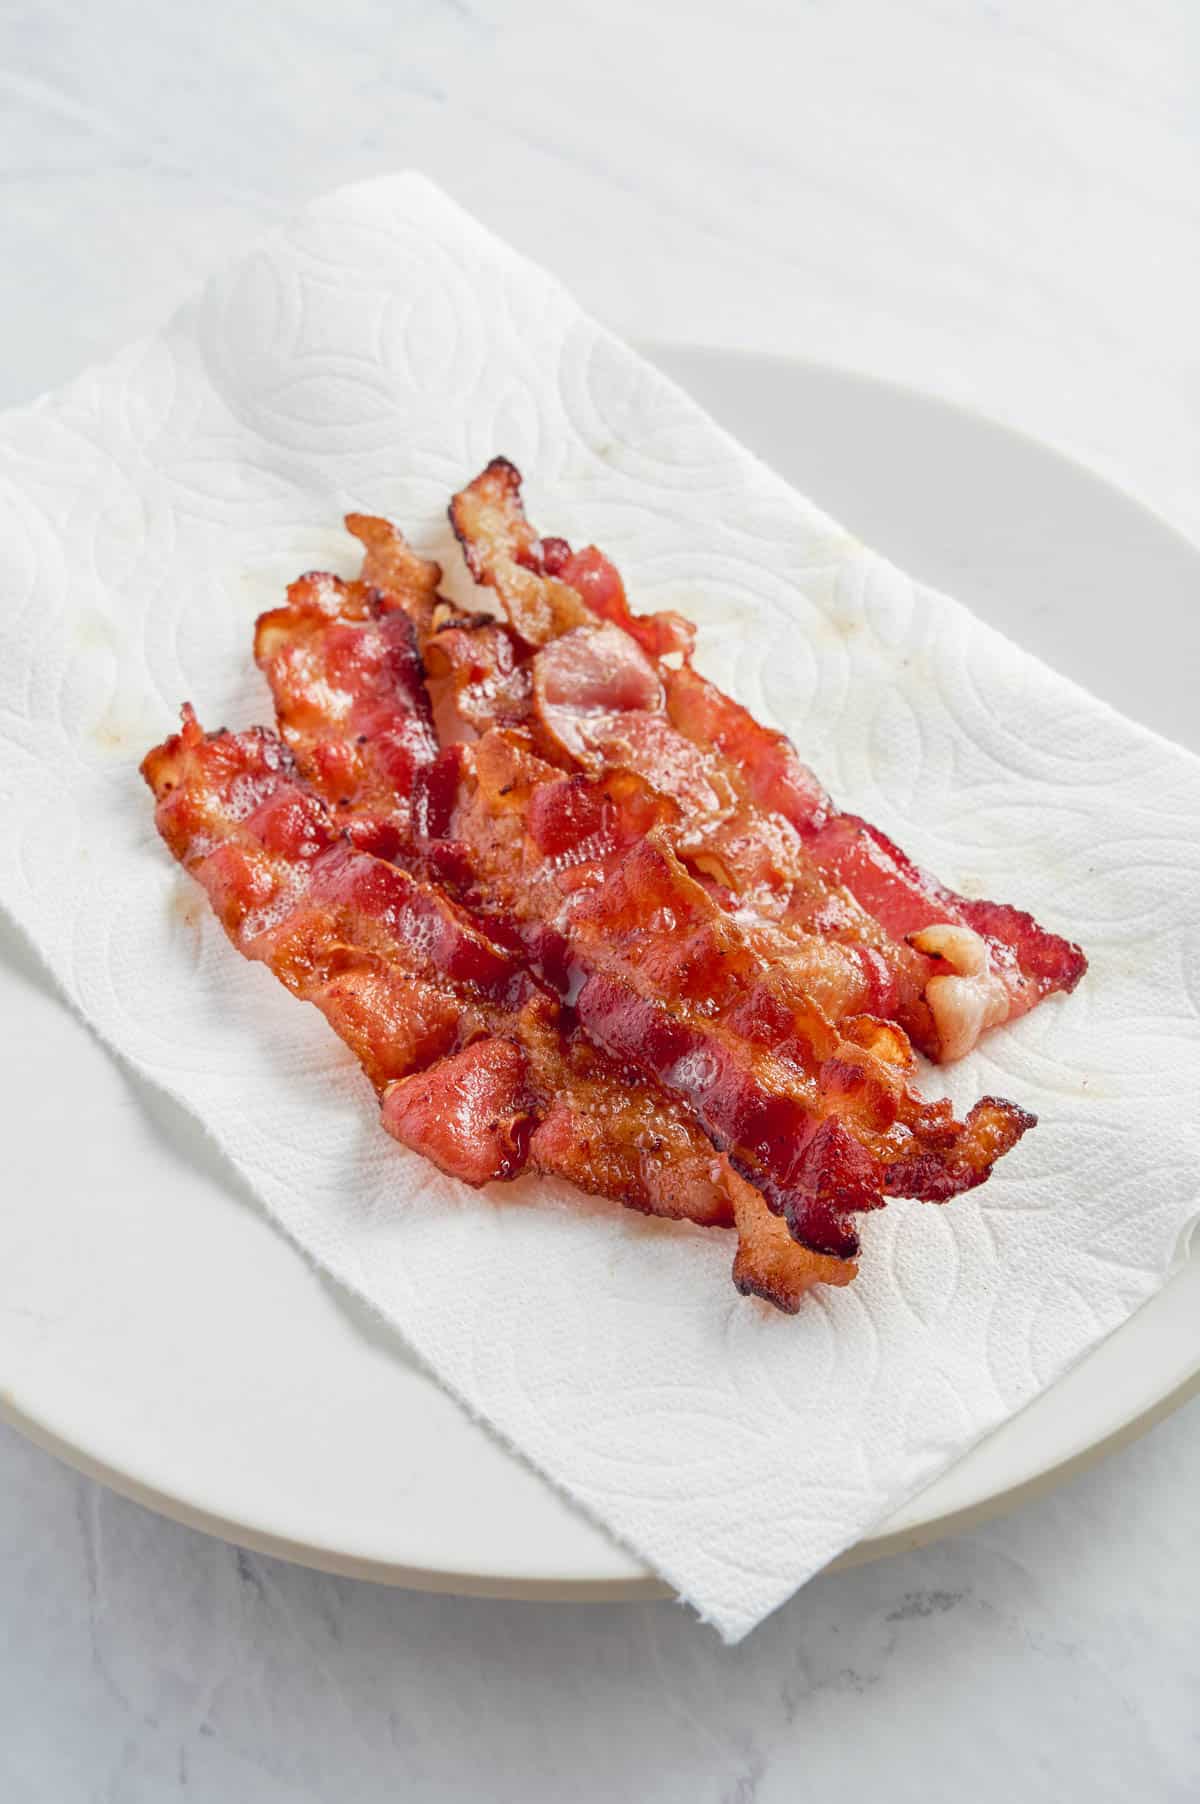 Bacon drains on a paper towel-lined plate.